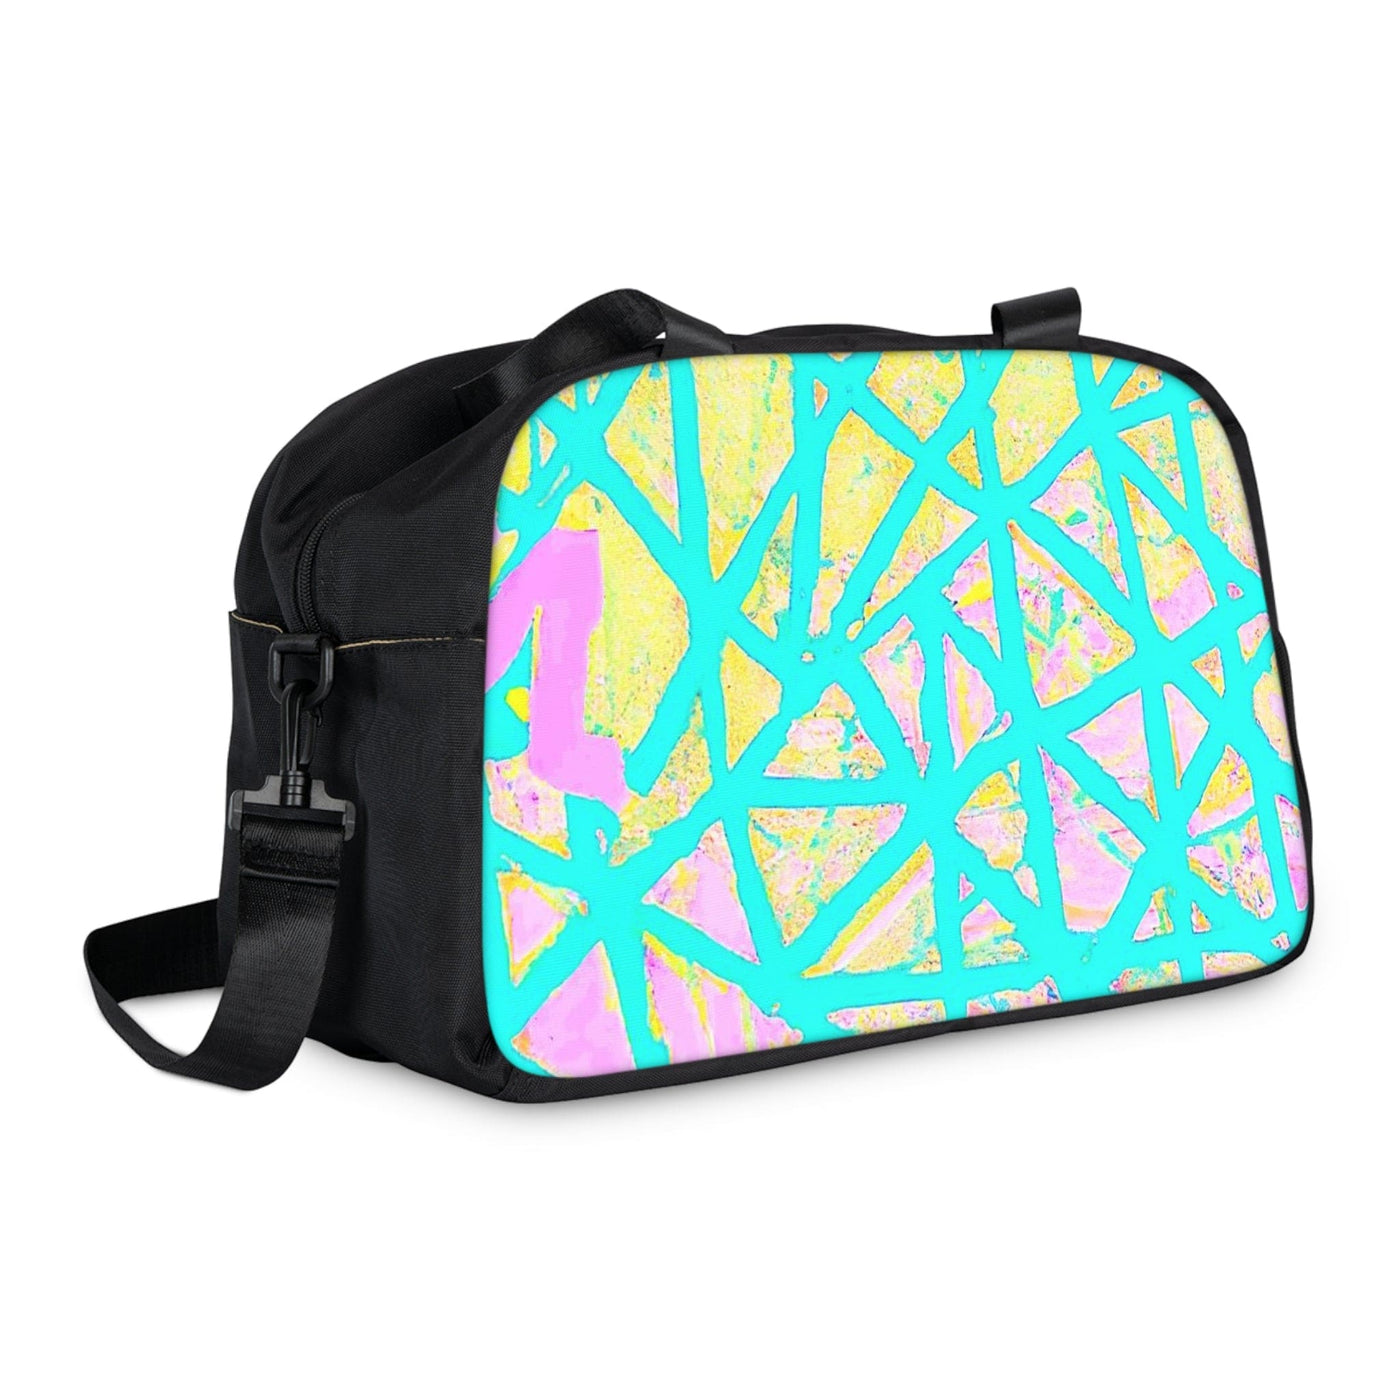 Travel Fitness Bag Cyan Blue Lime Green And Pink Pattern - Bags